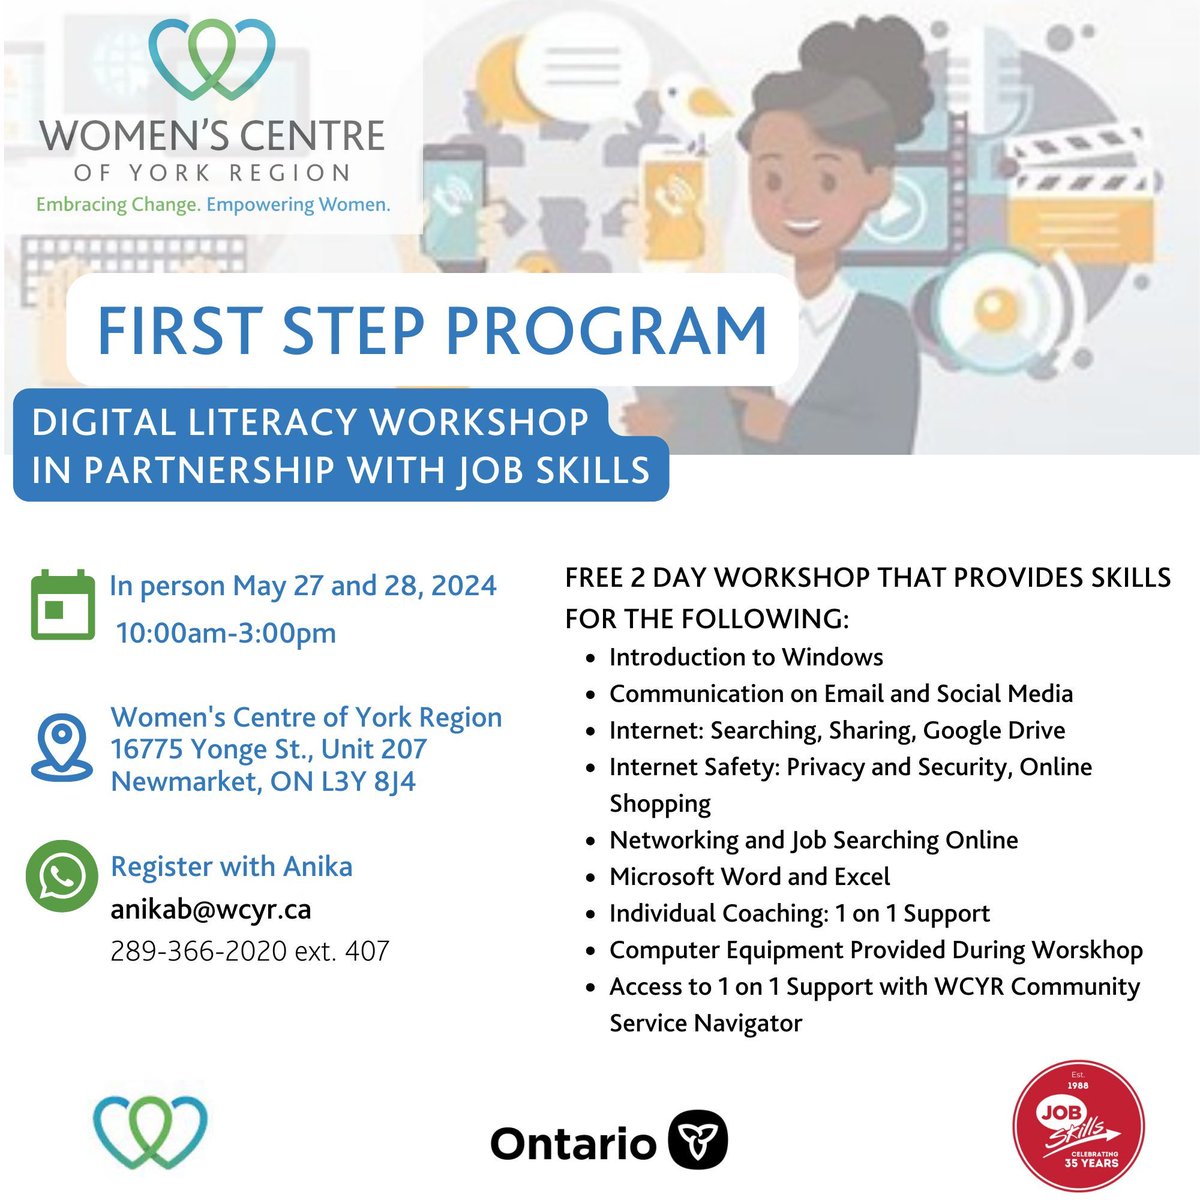 Join the Digital Literacy Workshop! For women-identified individuals 18+ to develop & enhance their digital literacy skills. Lessons include introduction to Microsoft, email communication, social media, internet safety & more! #DigitalLiteracy #EmpoweringWomen #YorkRegion